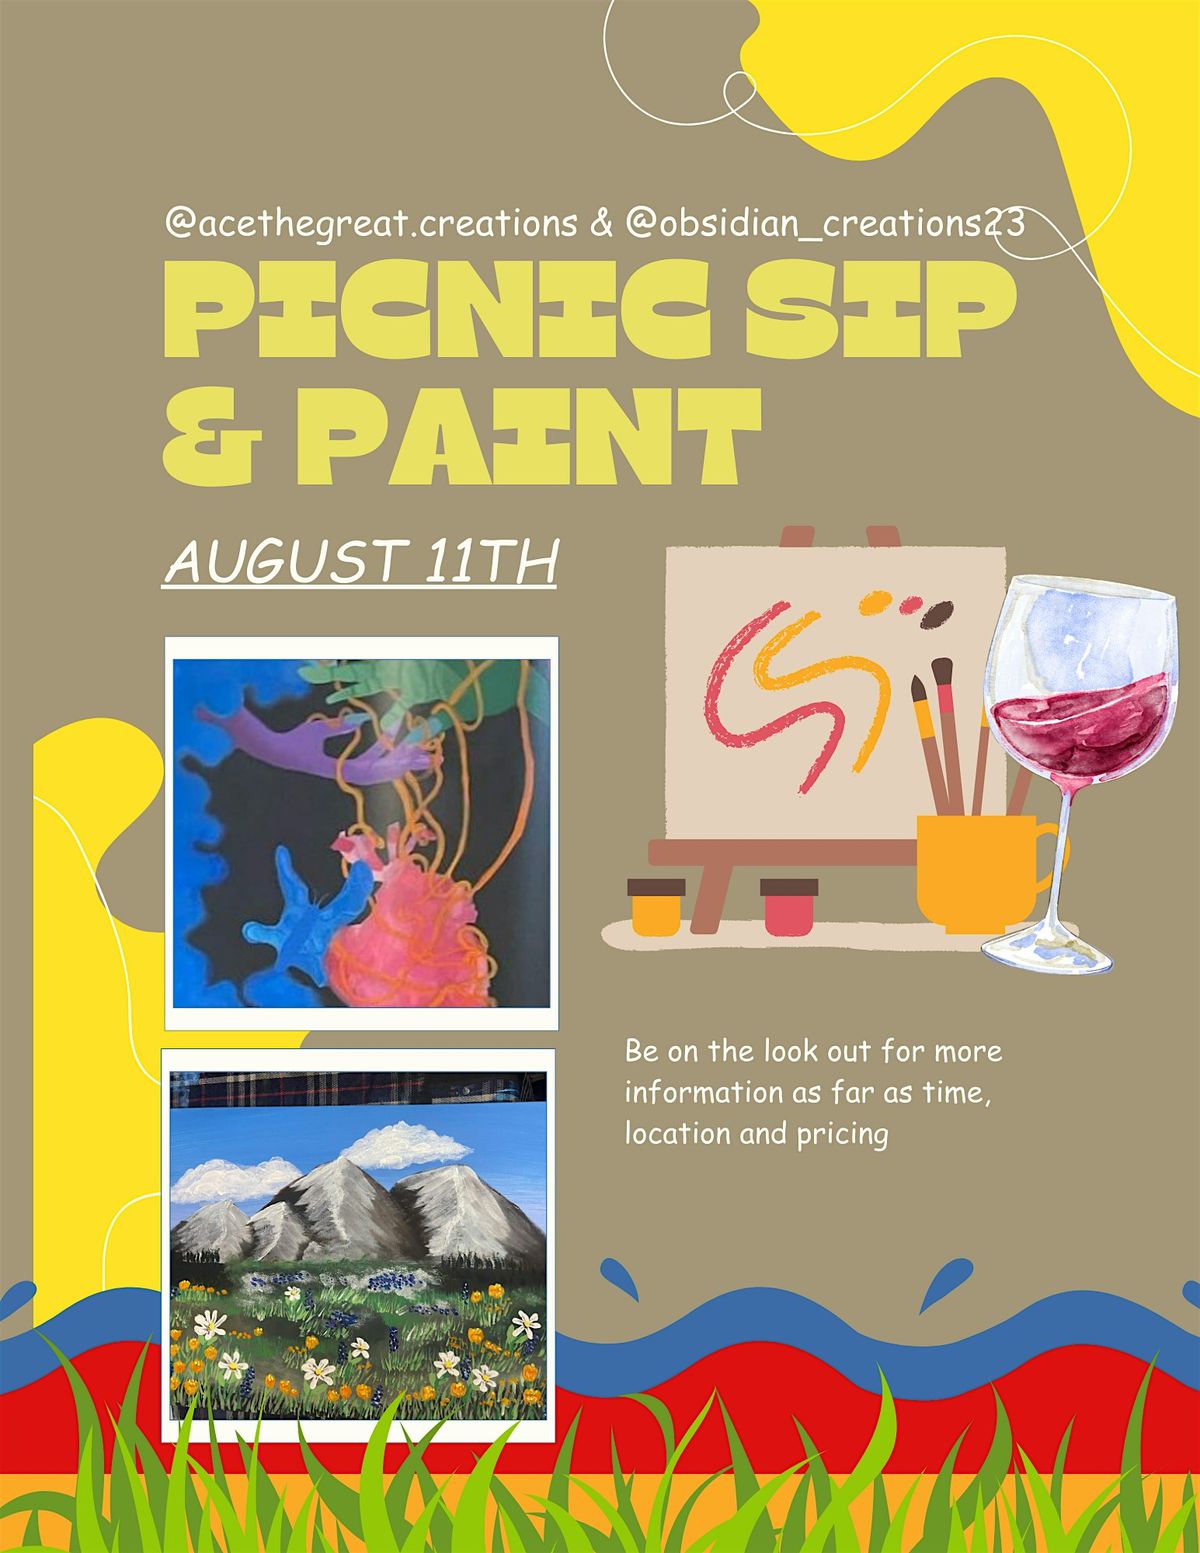 AD Creations: Picnic Sip & Paint